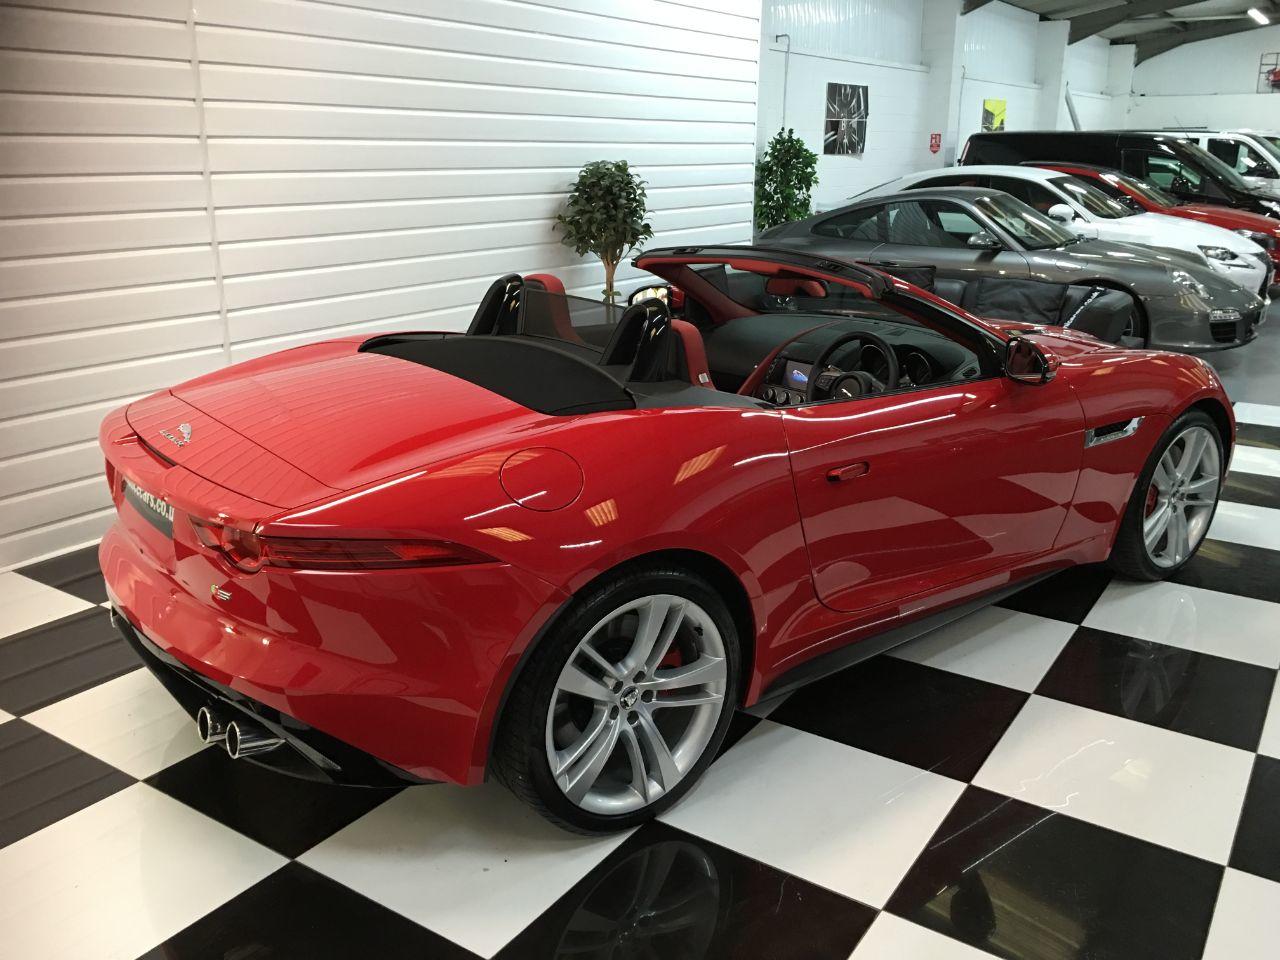 Jaguar F-type 5.0 Supercharged V8 S 2dr Auto Convertible Petrol Salsa Red